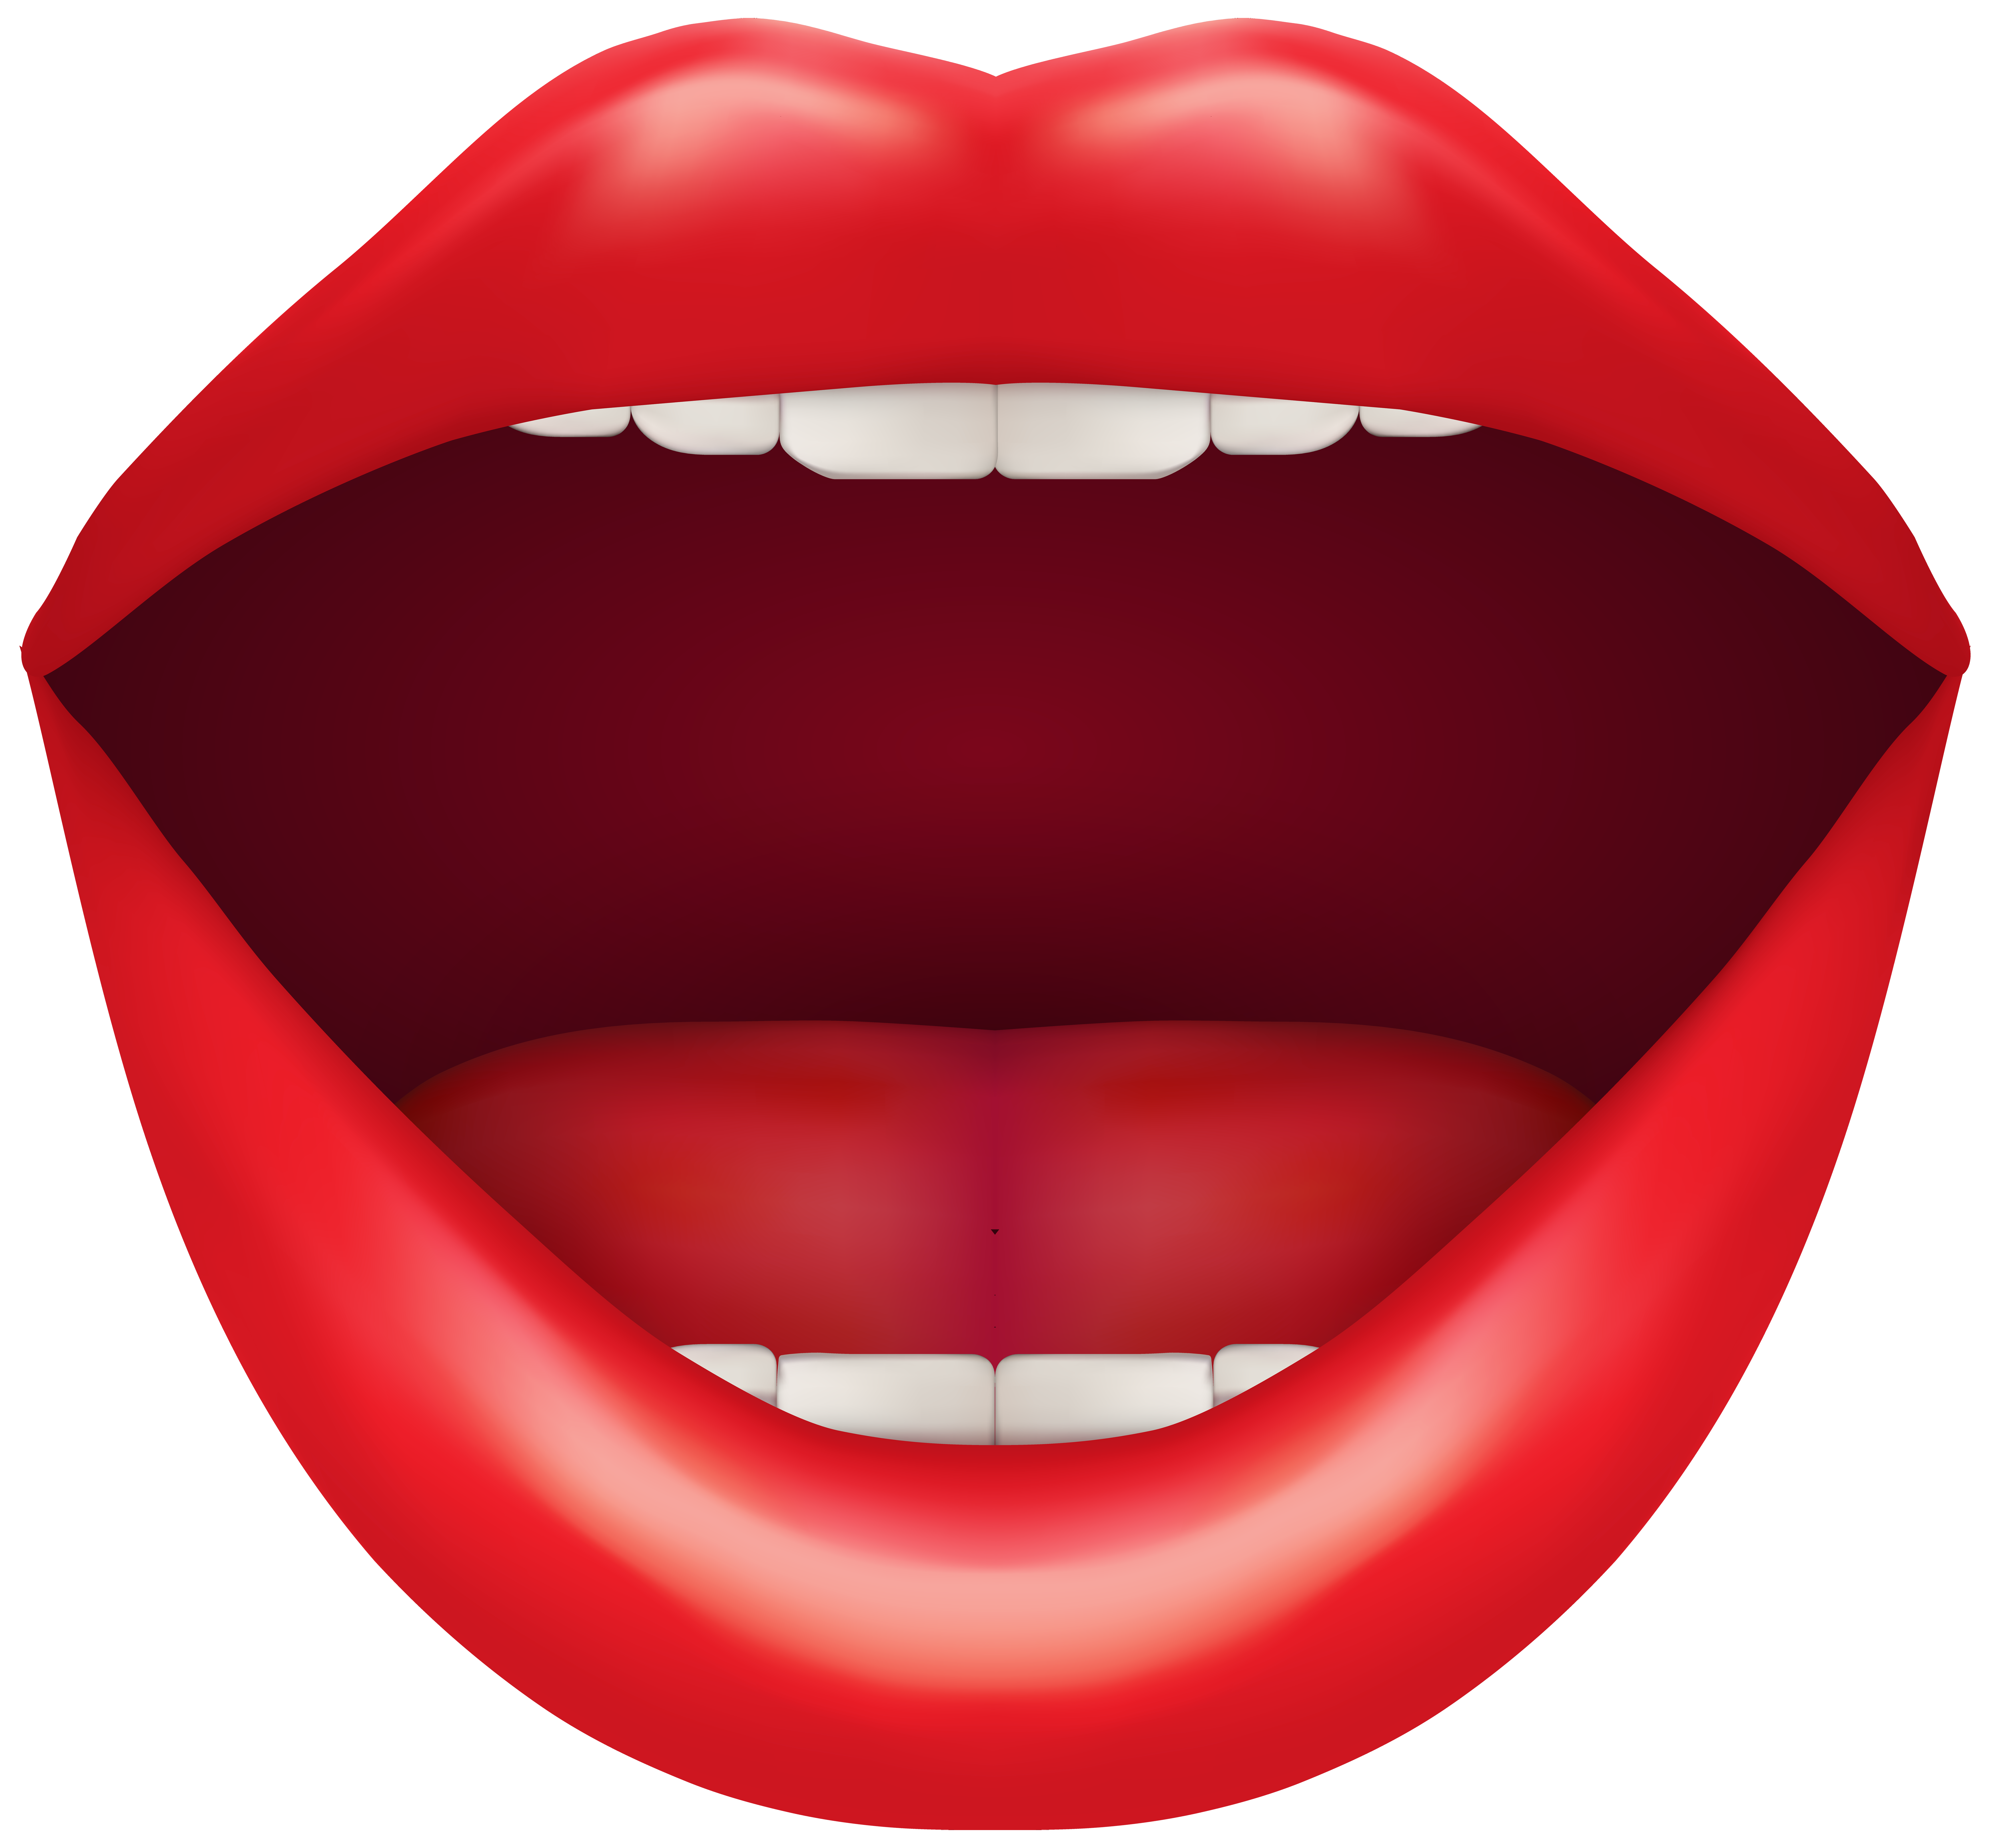 Open Red Mouth PNG Clip Art - Best WEB Clipart